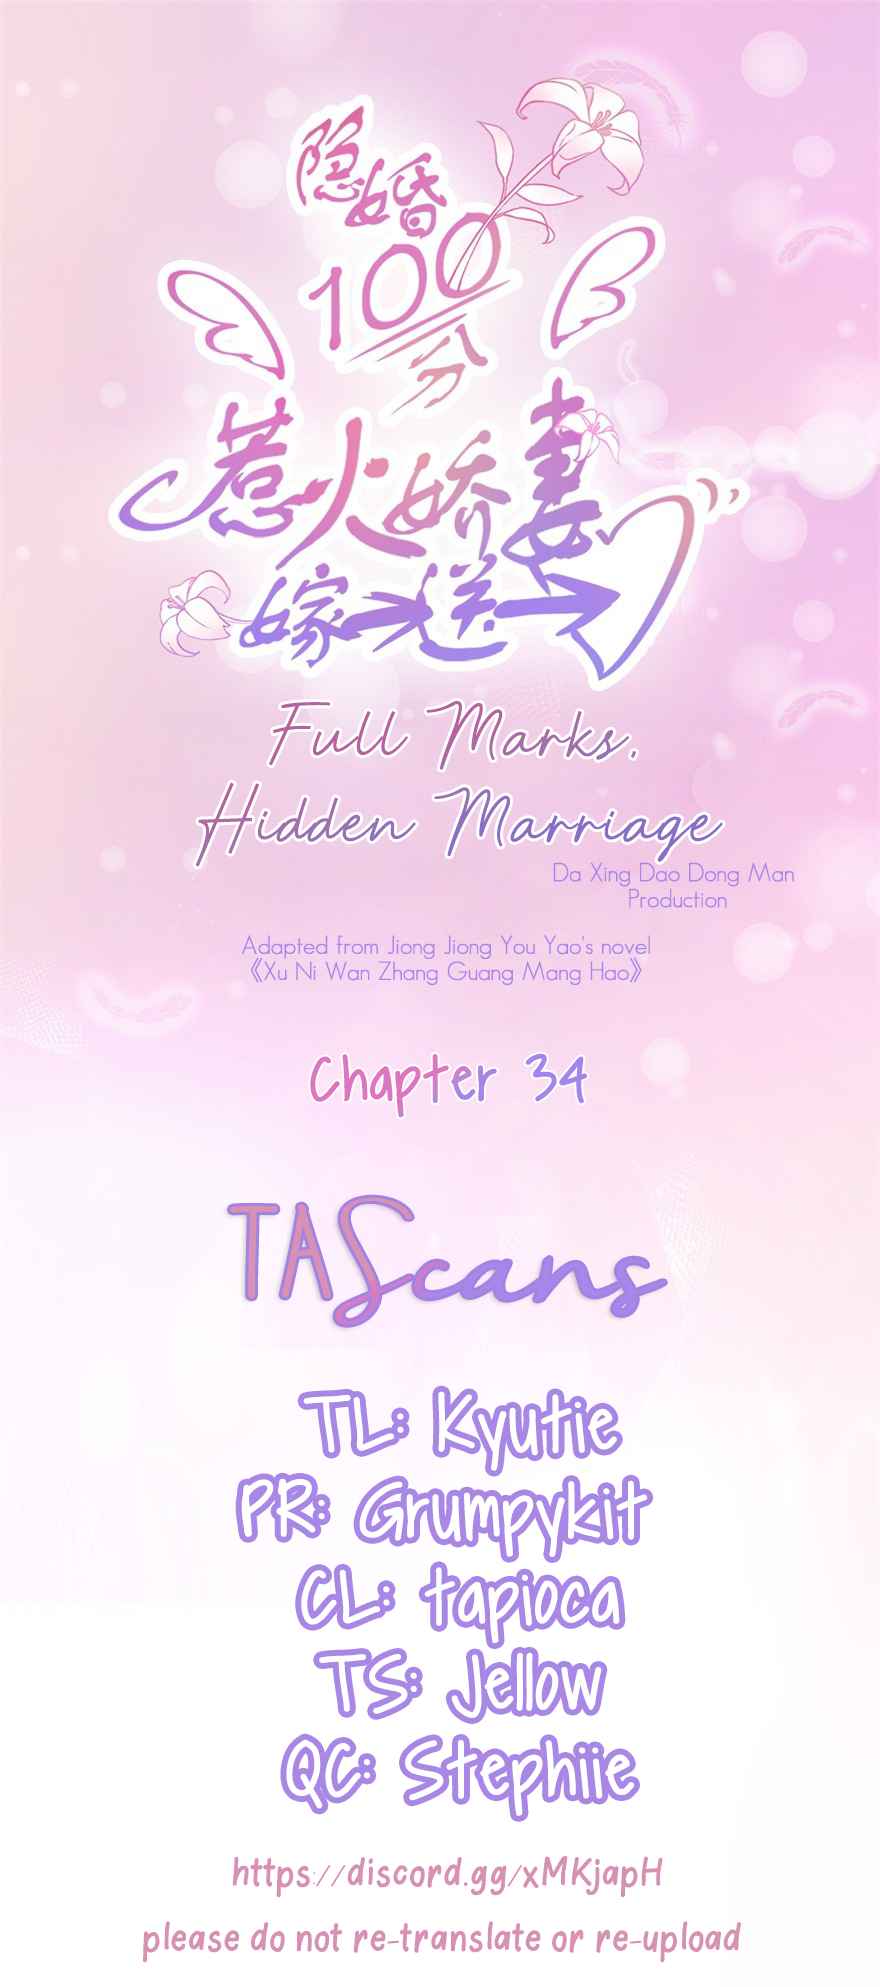 Full Marks, Hidden Marriage Ch. 34 Ning Xi get out of Entertainment Circle